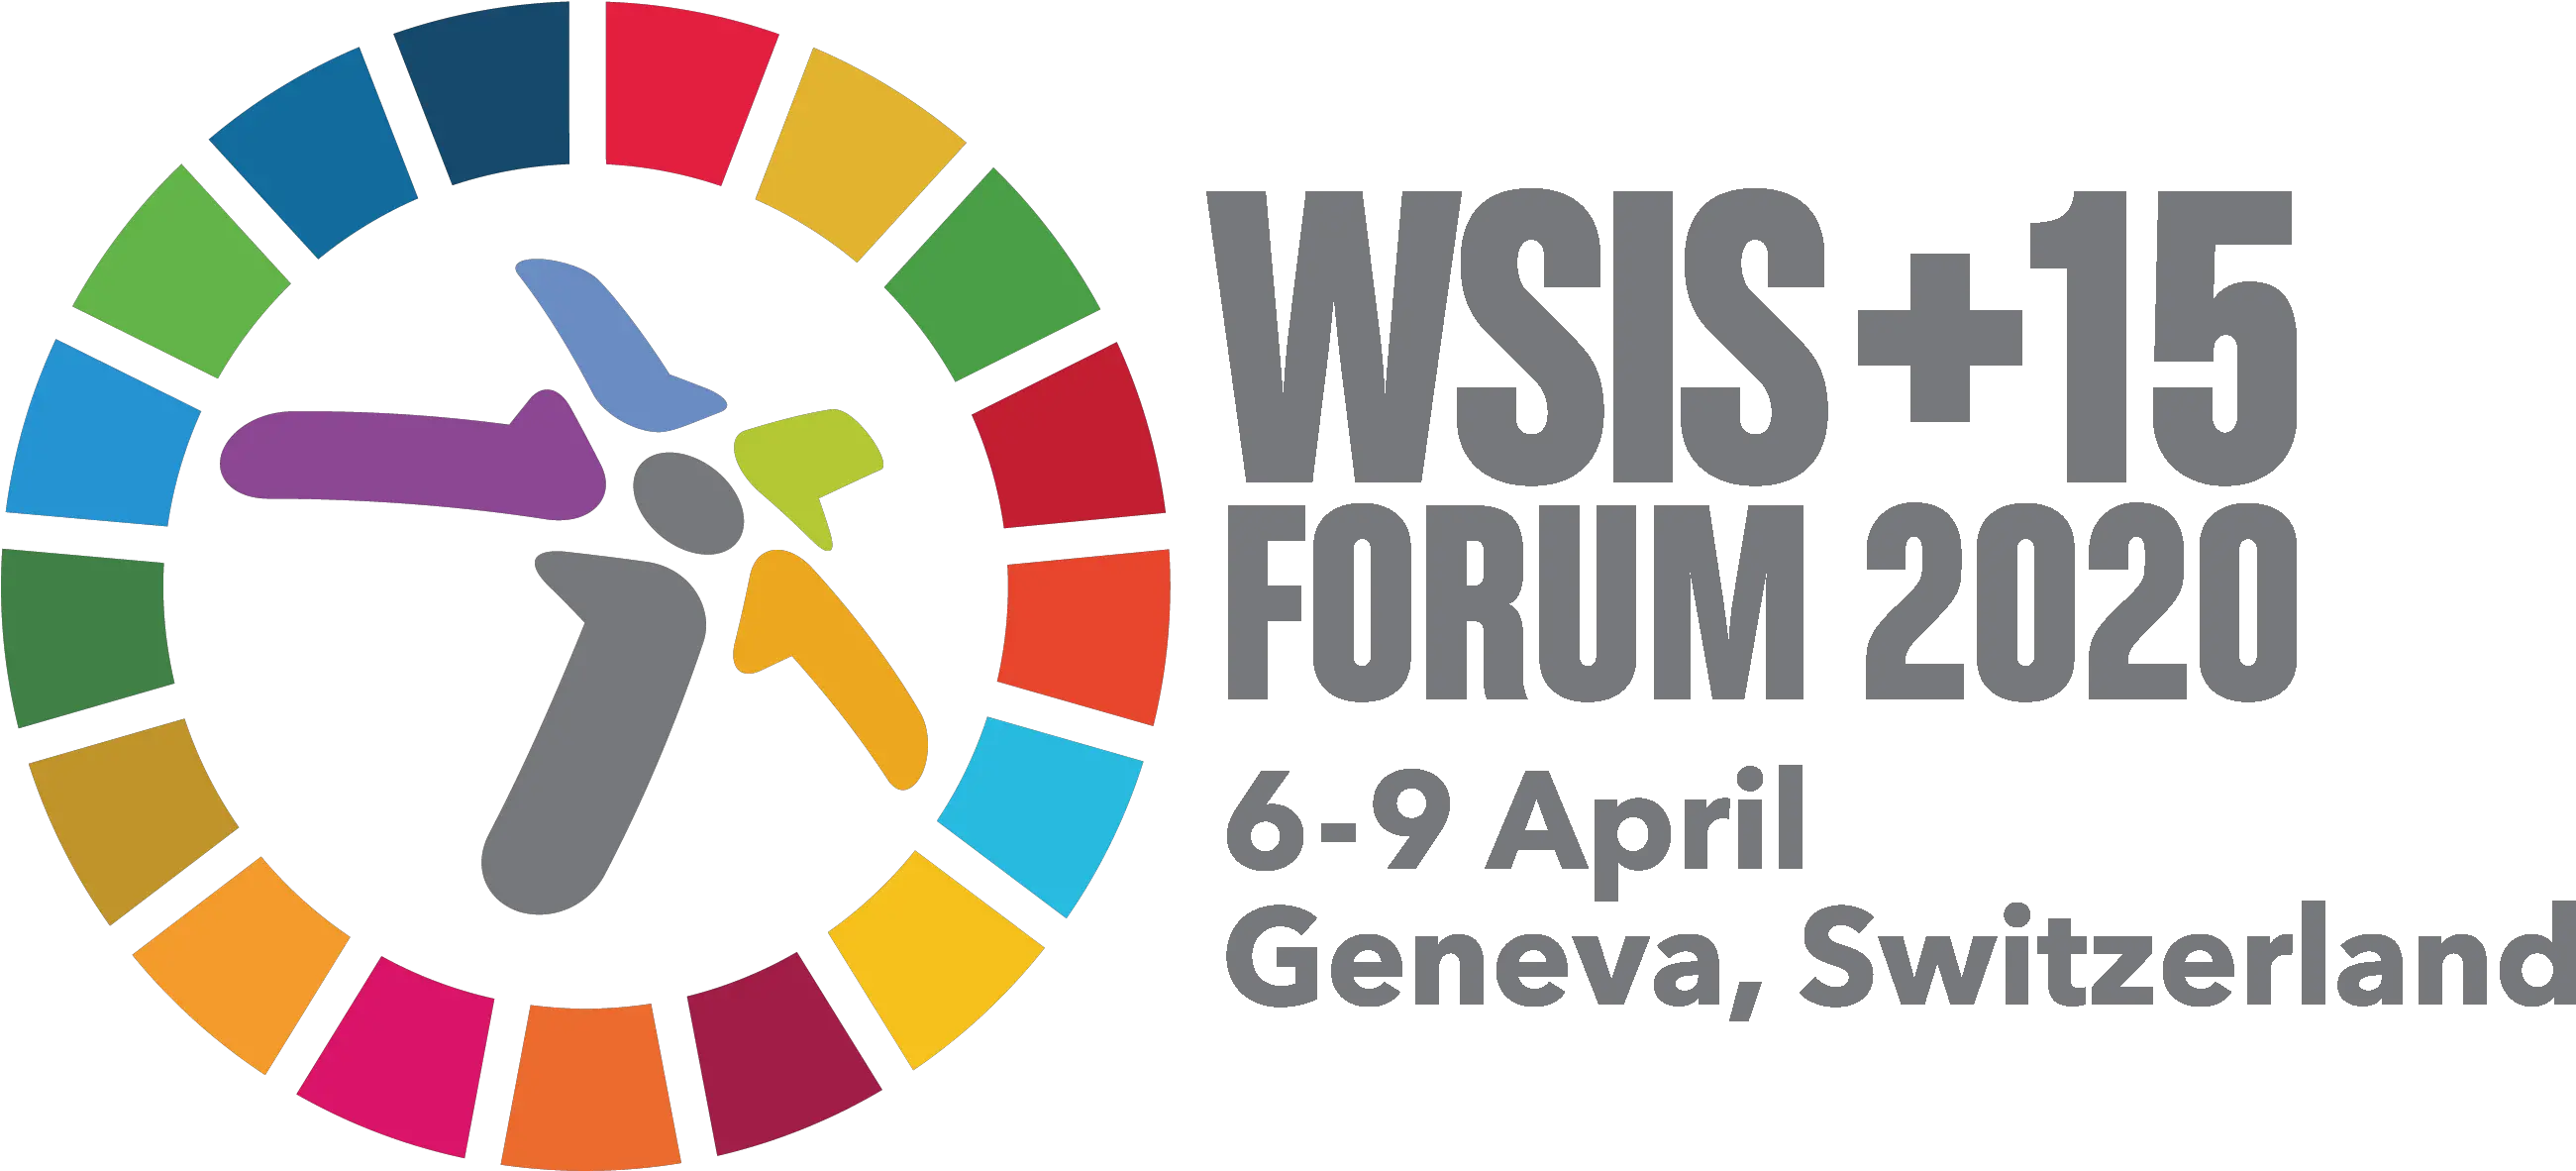 Wsis Forum 2020 Png Action Lines